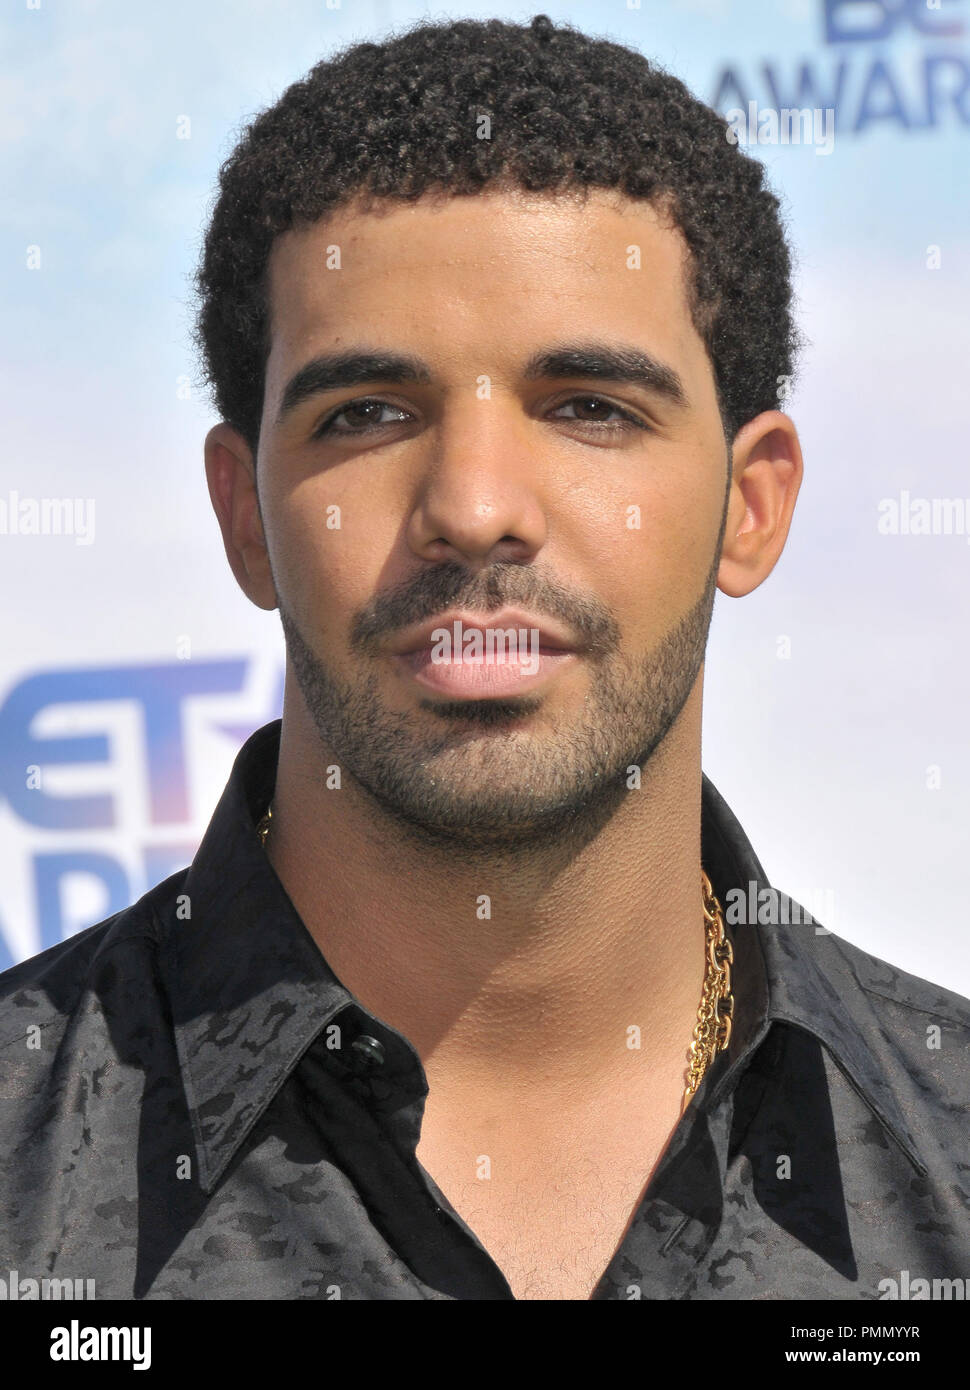 Drake at the BET Awards' 11 - Arrivals held at The Shrine Auditorium in Los Angeles, CA. The event took place on Sunday, June 26, 2011. Photo by PRPP Pacific Rim Photo Press/ PictureLux Stock Photo